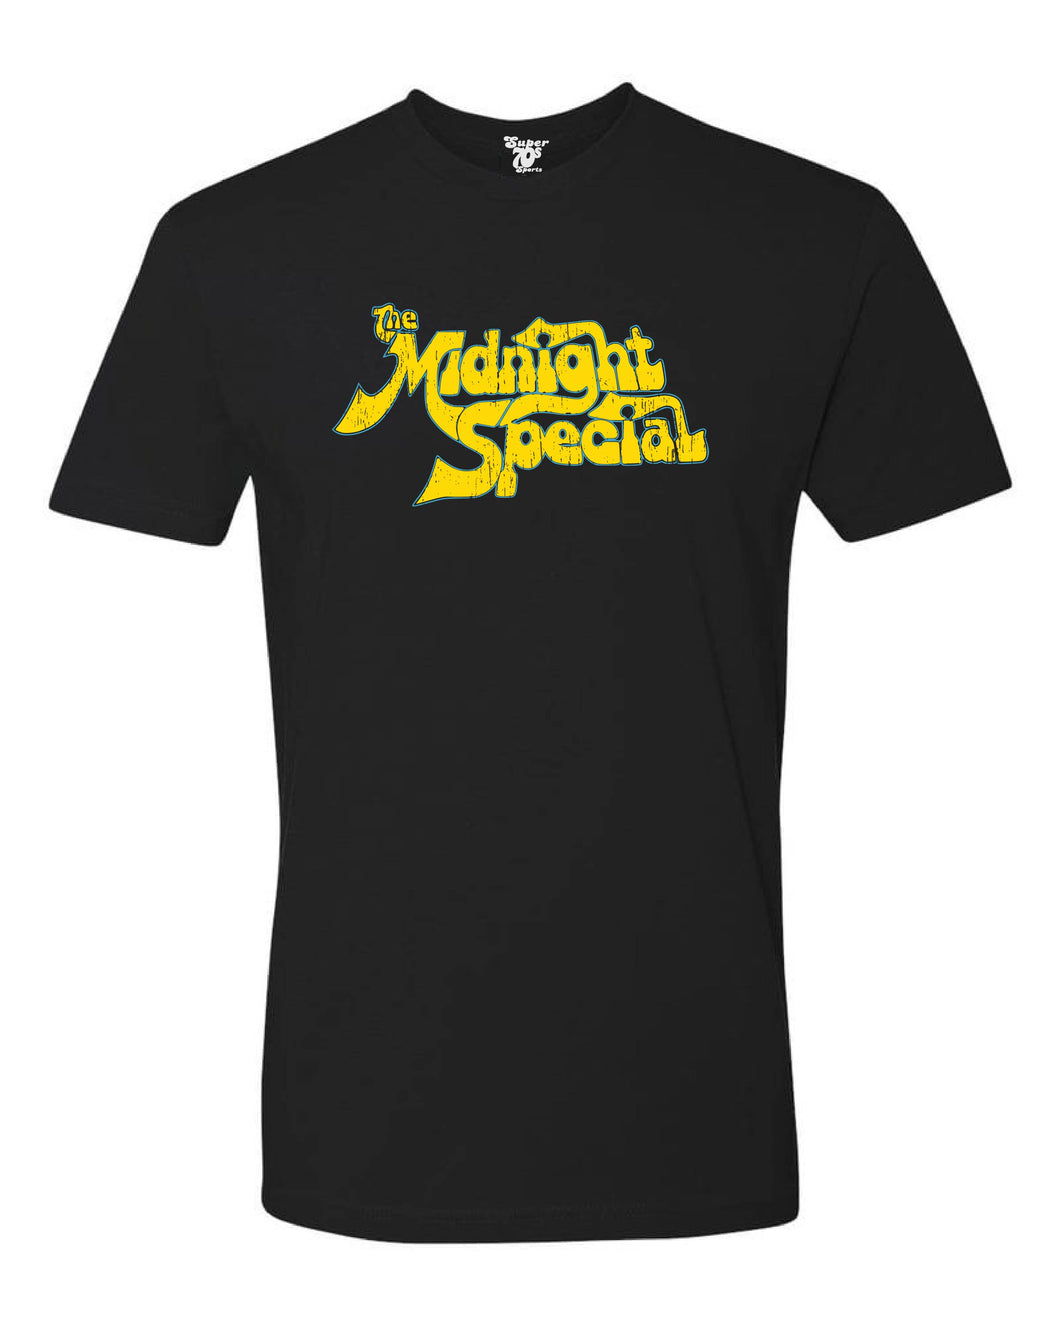 The Midnight Special Tee